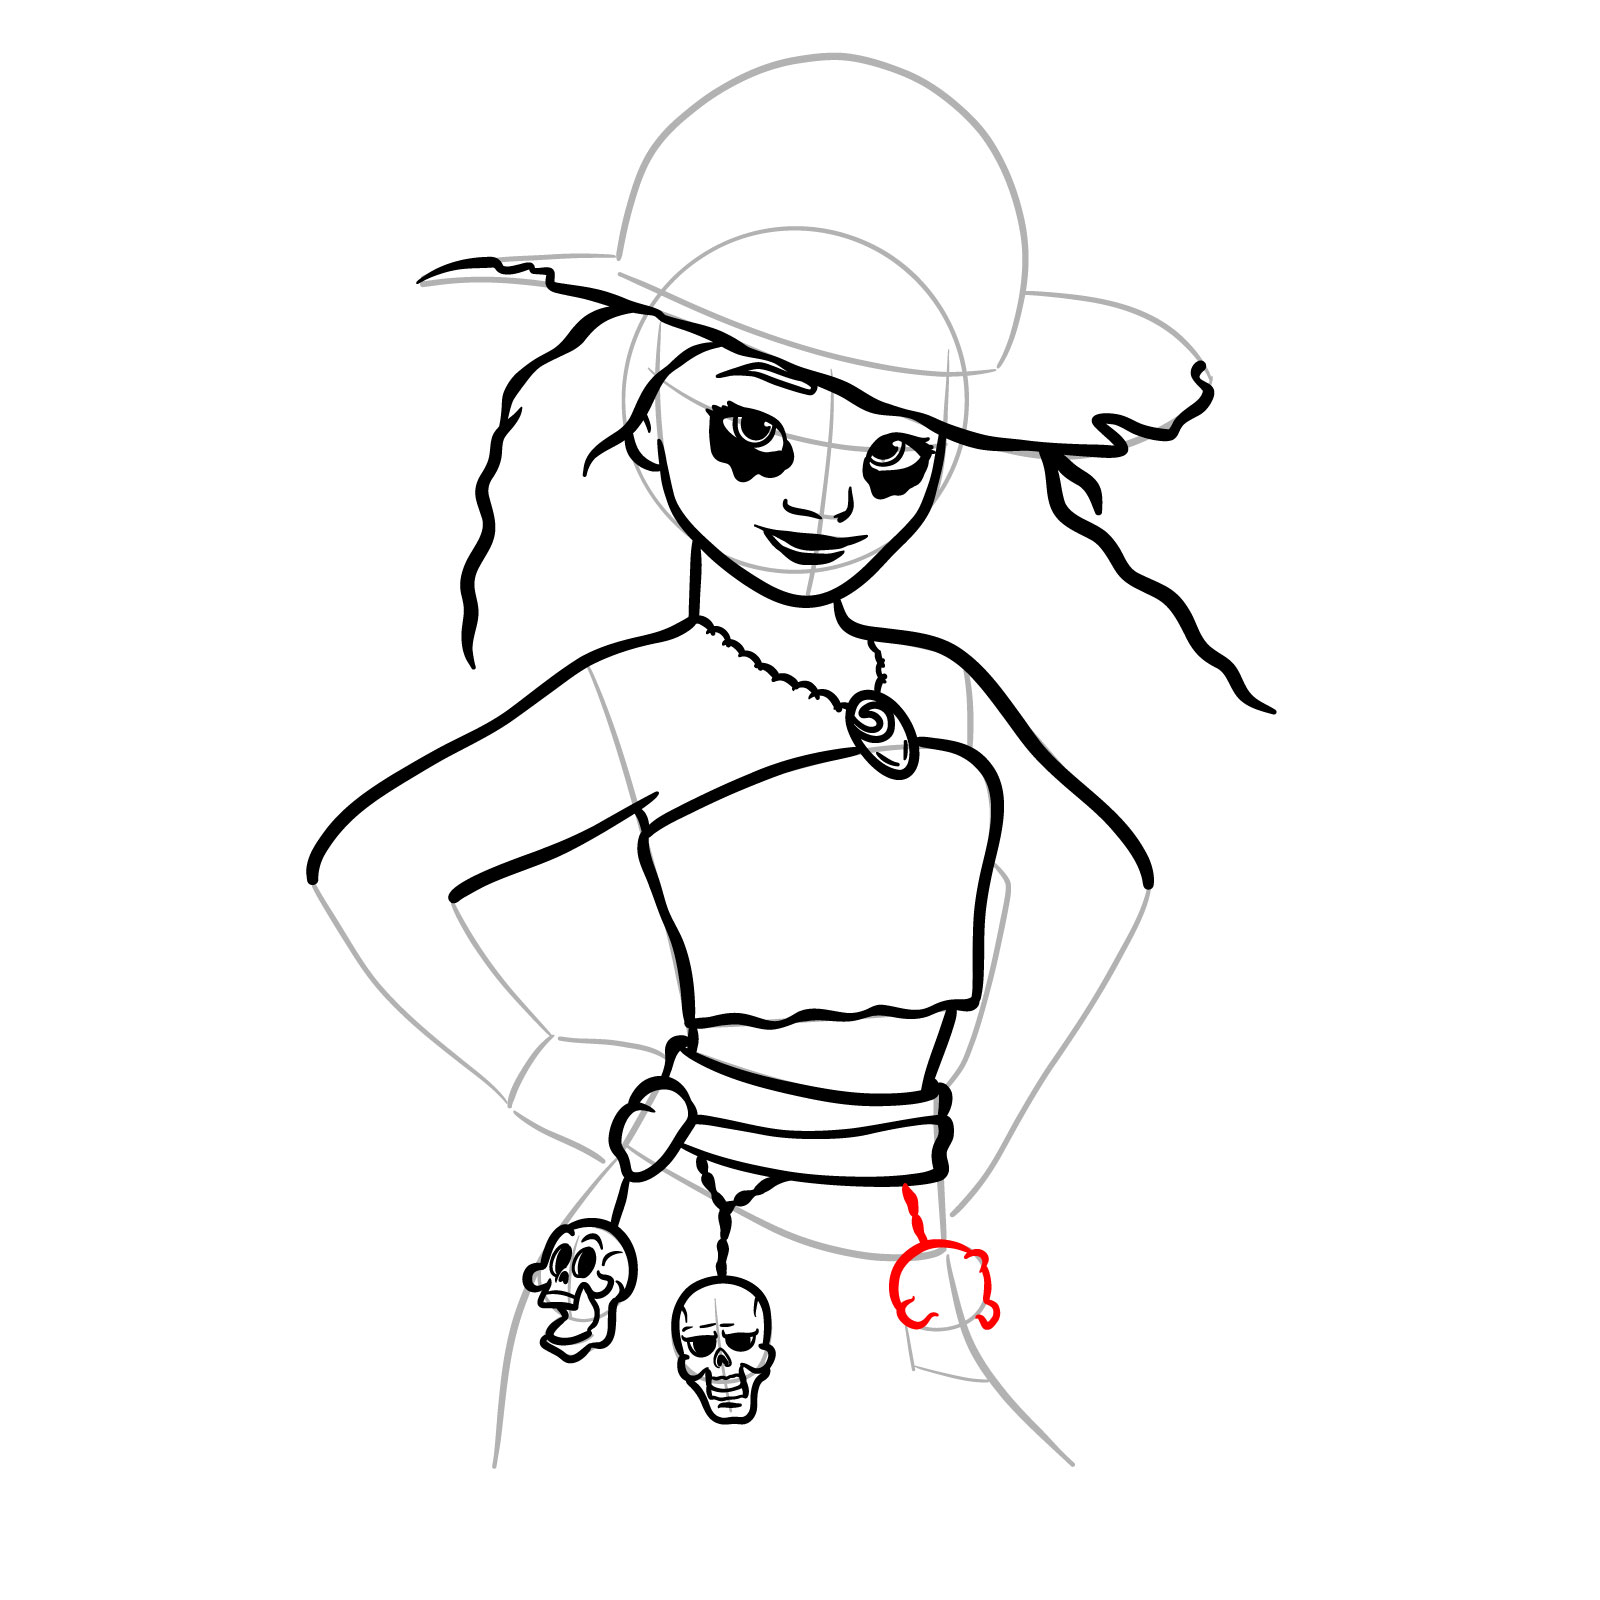 How to Draw Halloween Moana as a Staw Hat Pirate - step 24